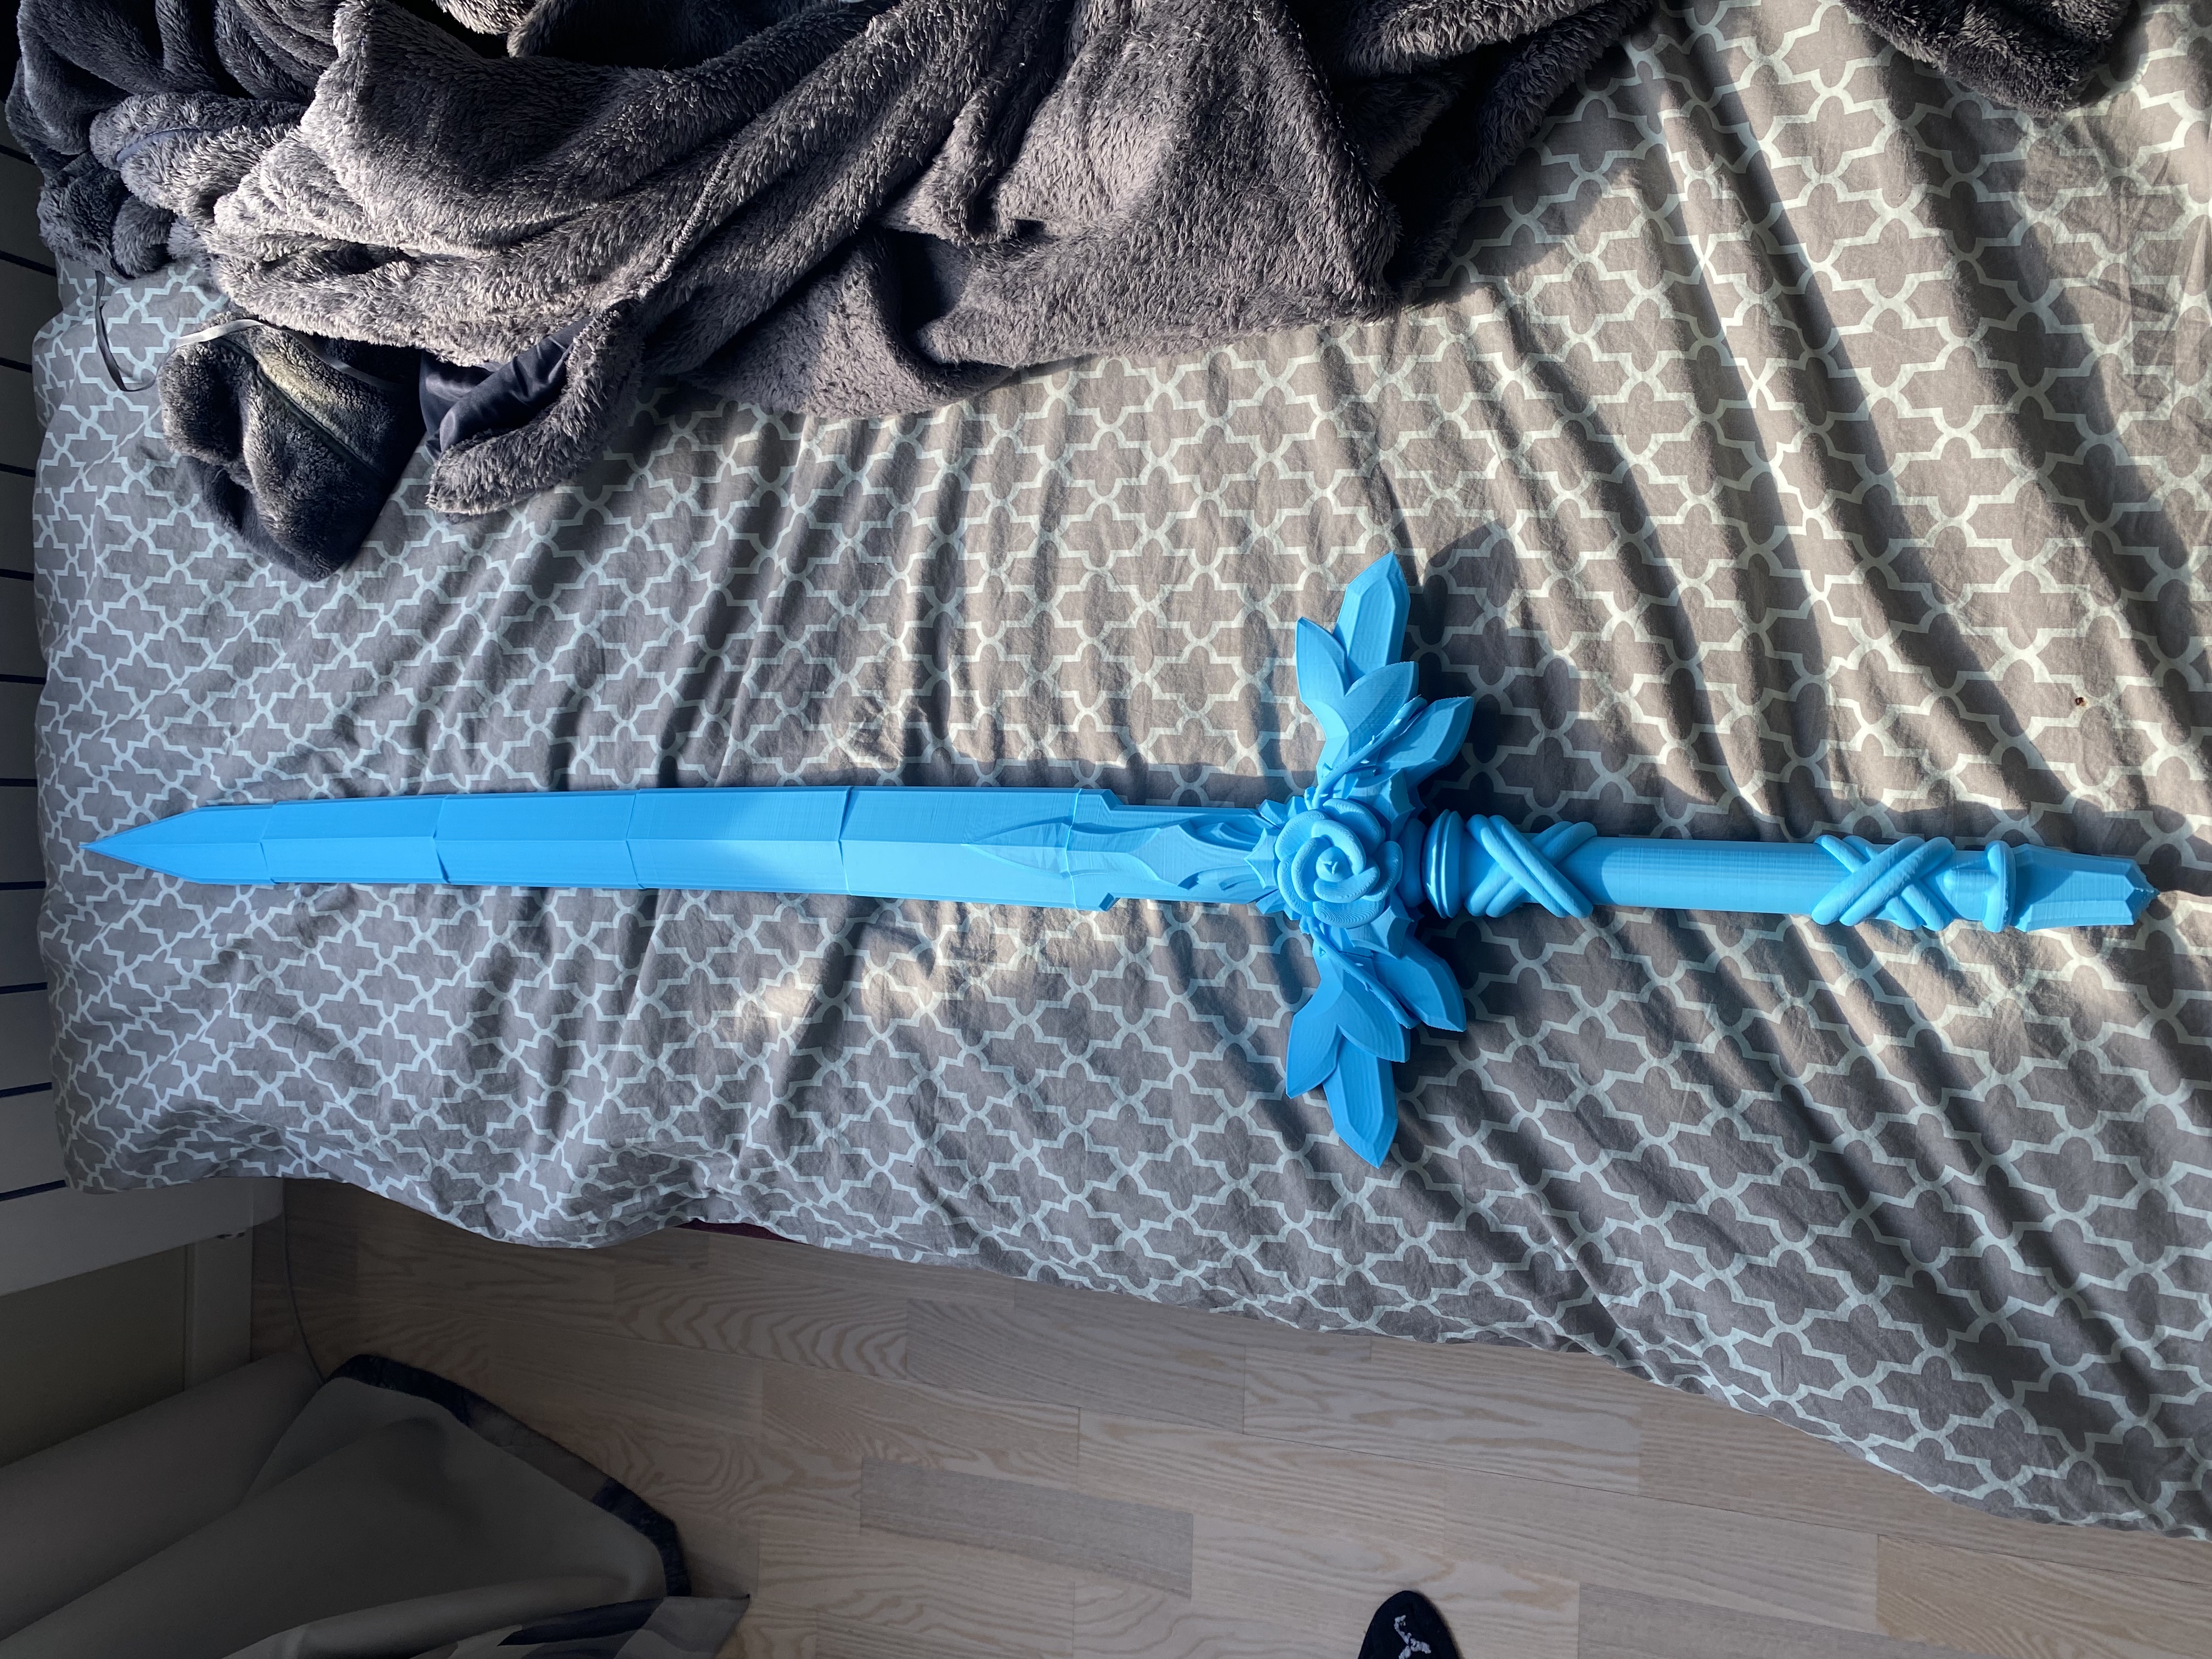 Eugeo's Blue Rose Sword 1:1 from anime "Sword Art Online: Alicization" with Scabbard